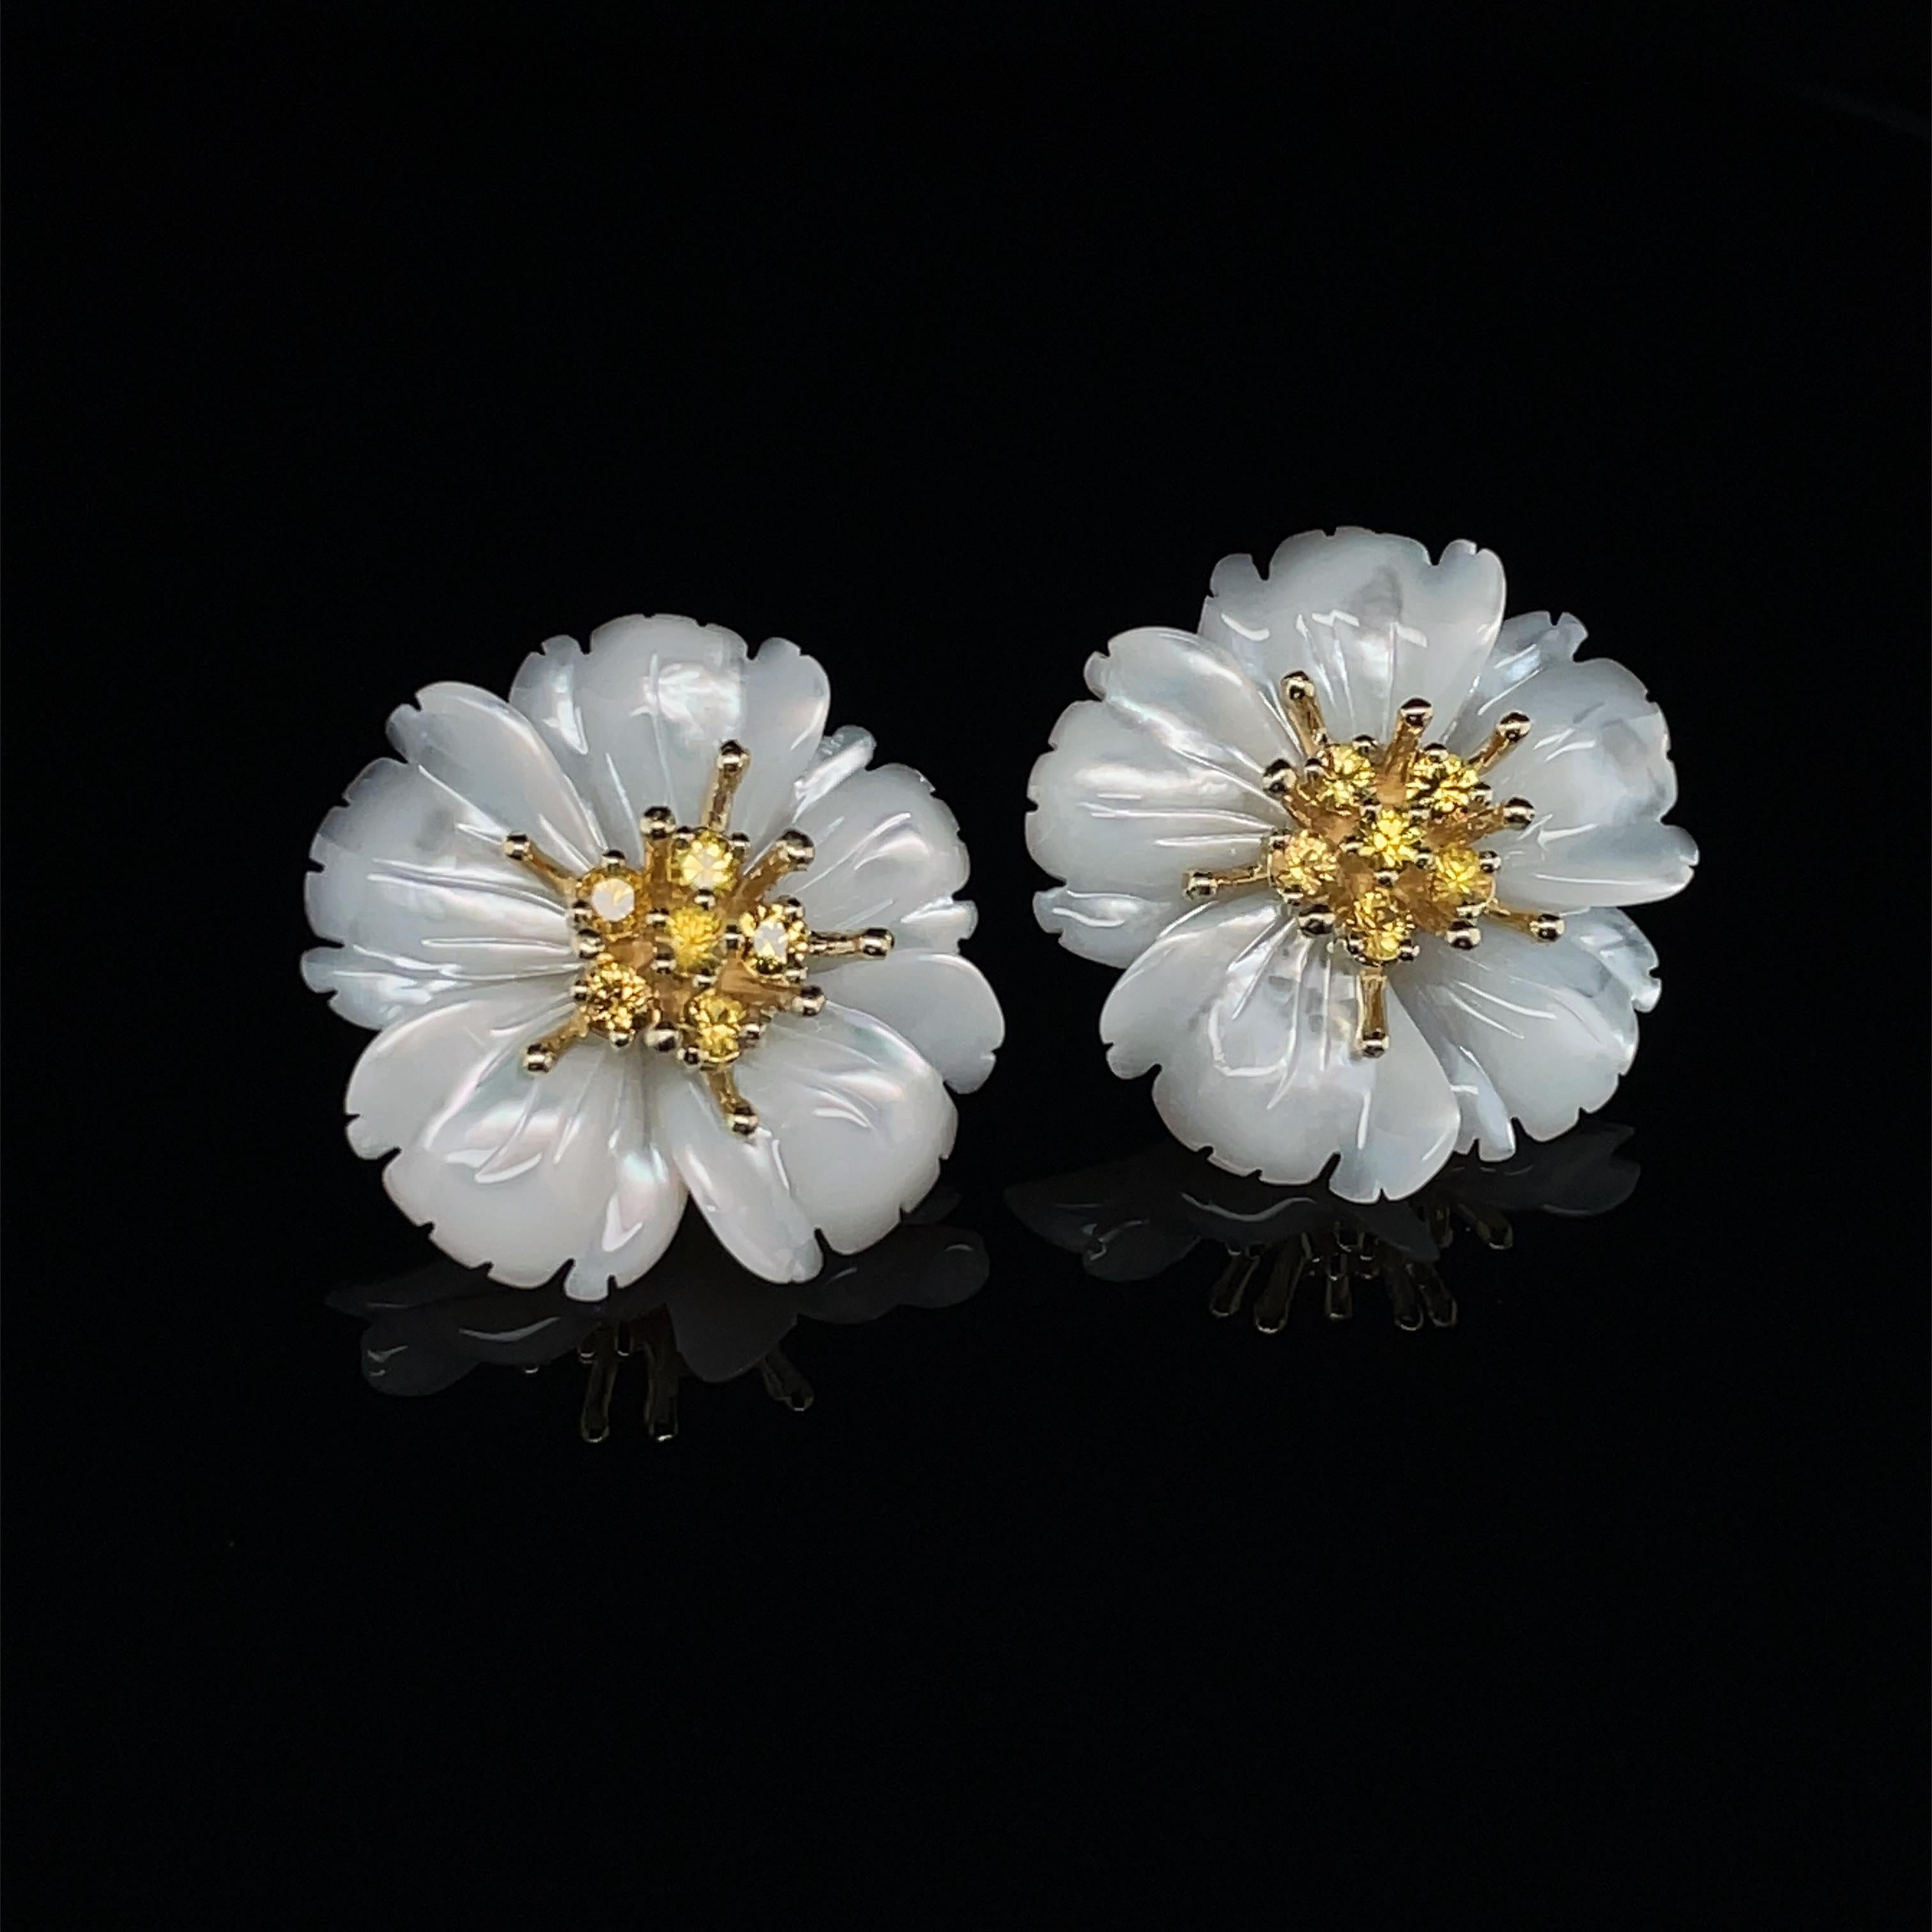 These finely hand-carved mother-of-pearl earrings will add eye-catching elegance to your jewelry wardrobe! The 3-dimensional flowers were intricately carved from lustrous, high-quality mother-of-pearl. The gold posts were designed to be the